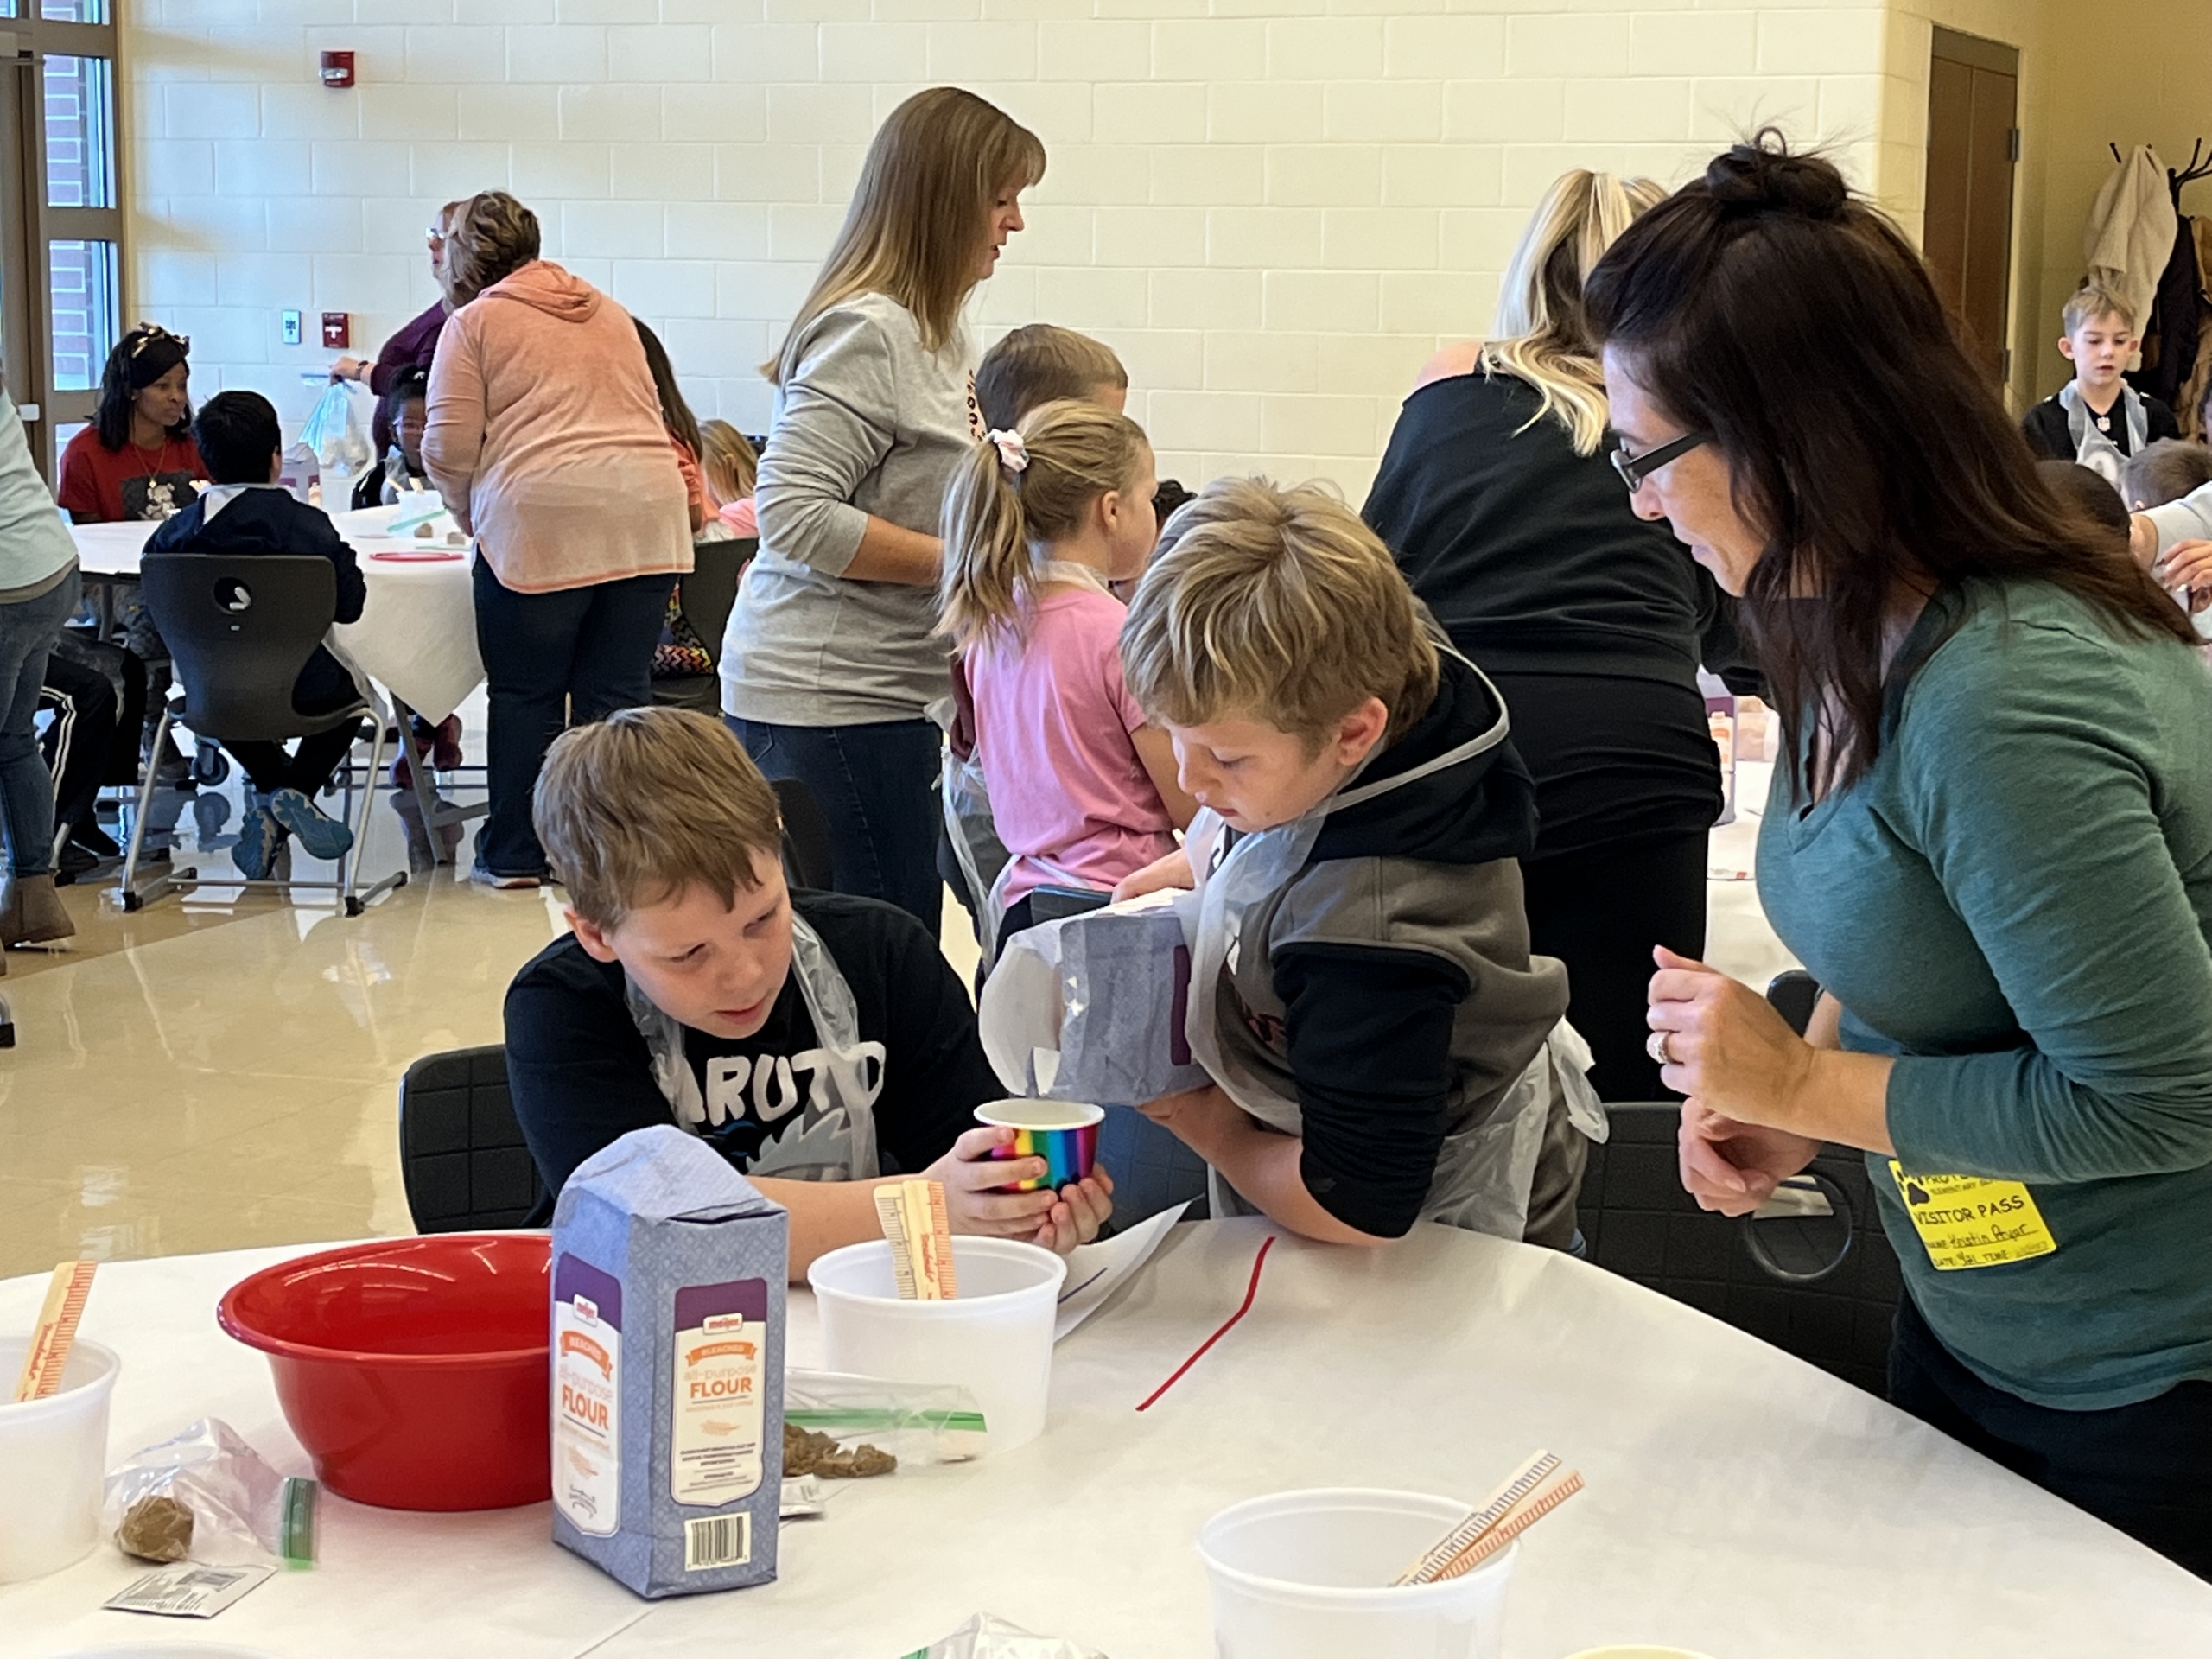 Our third graders were busy making bread to enjoy with their families. We had many volunteers who came to add a helping hand.